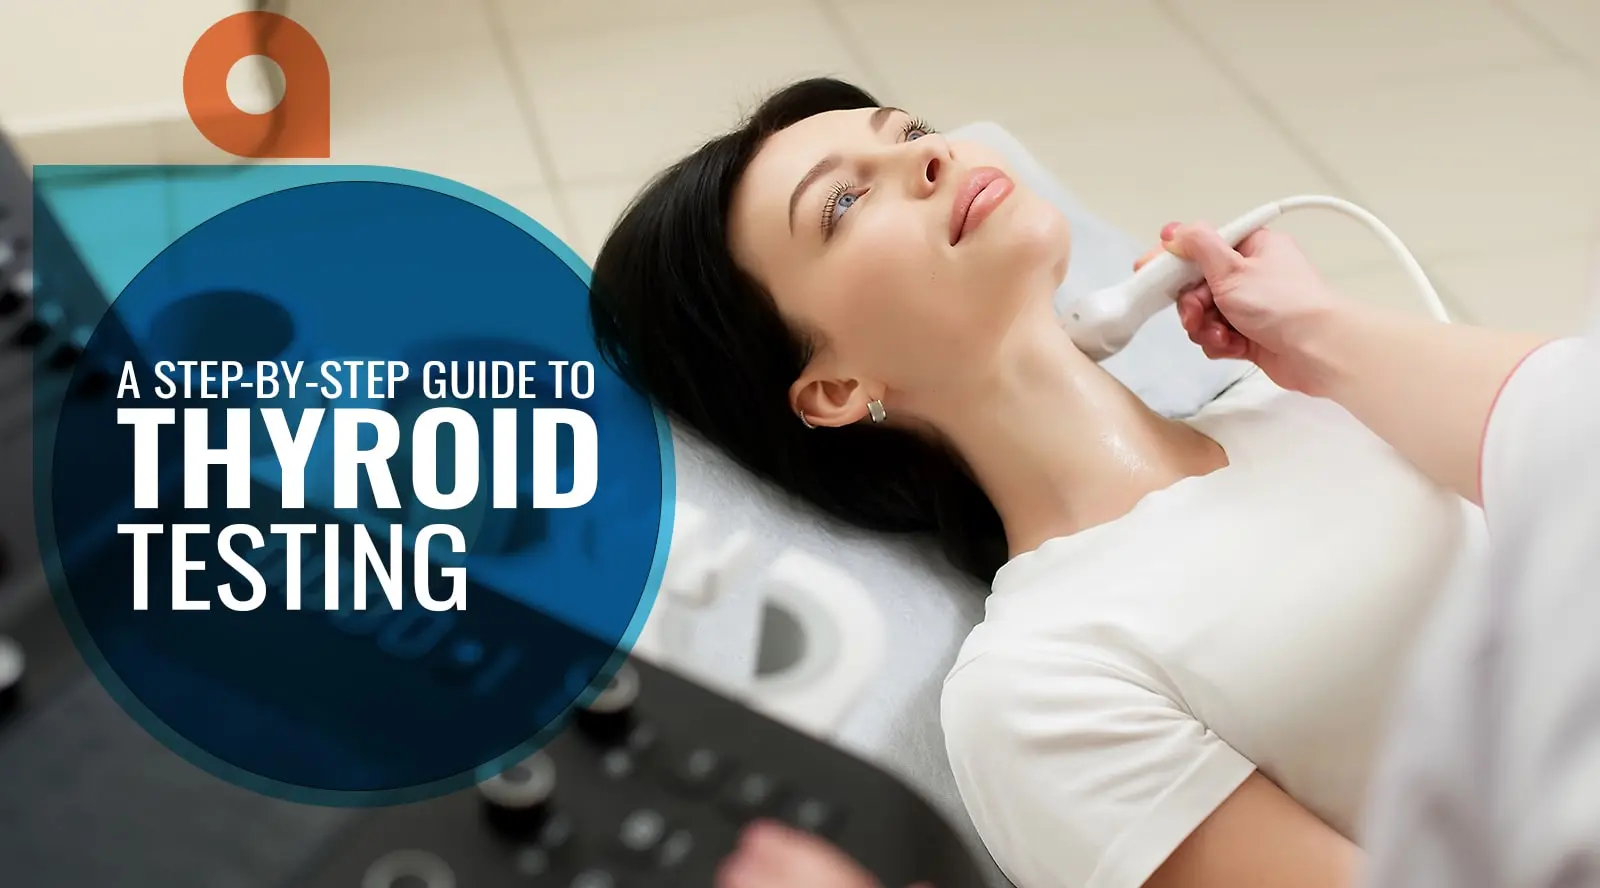 19 Signs to Identify You have Thyroid Problems